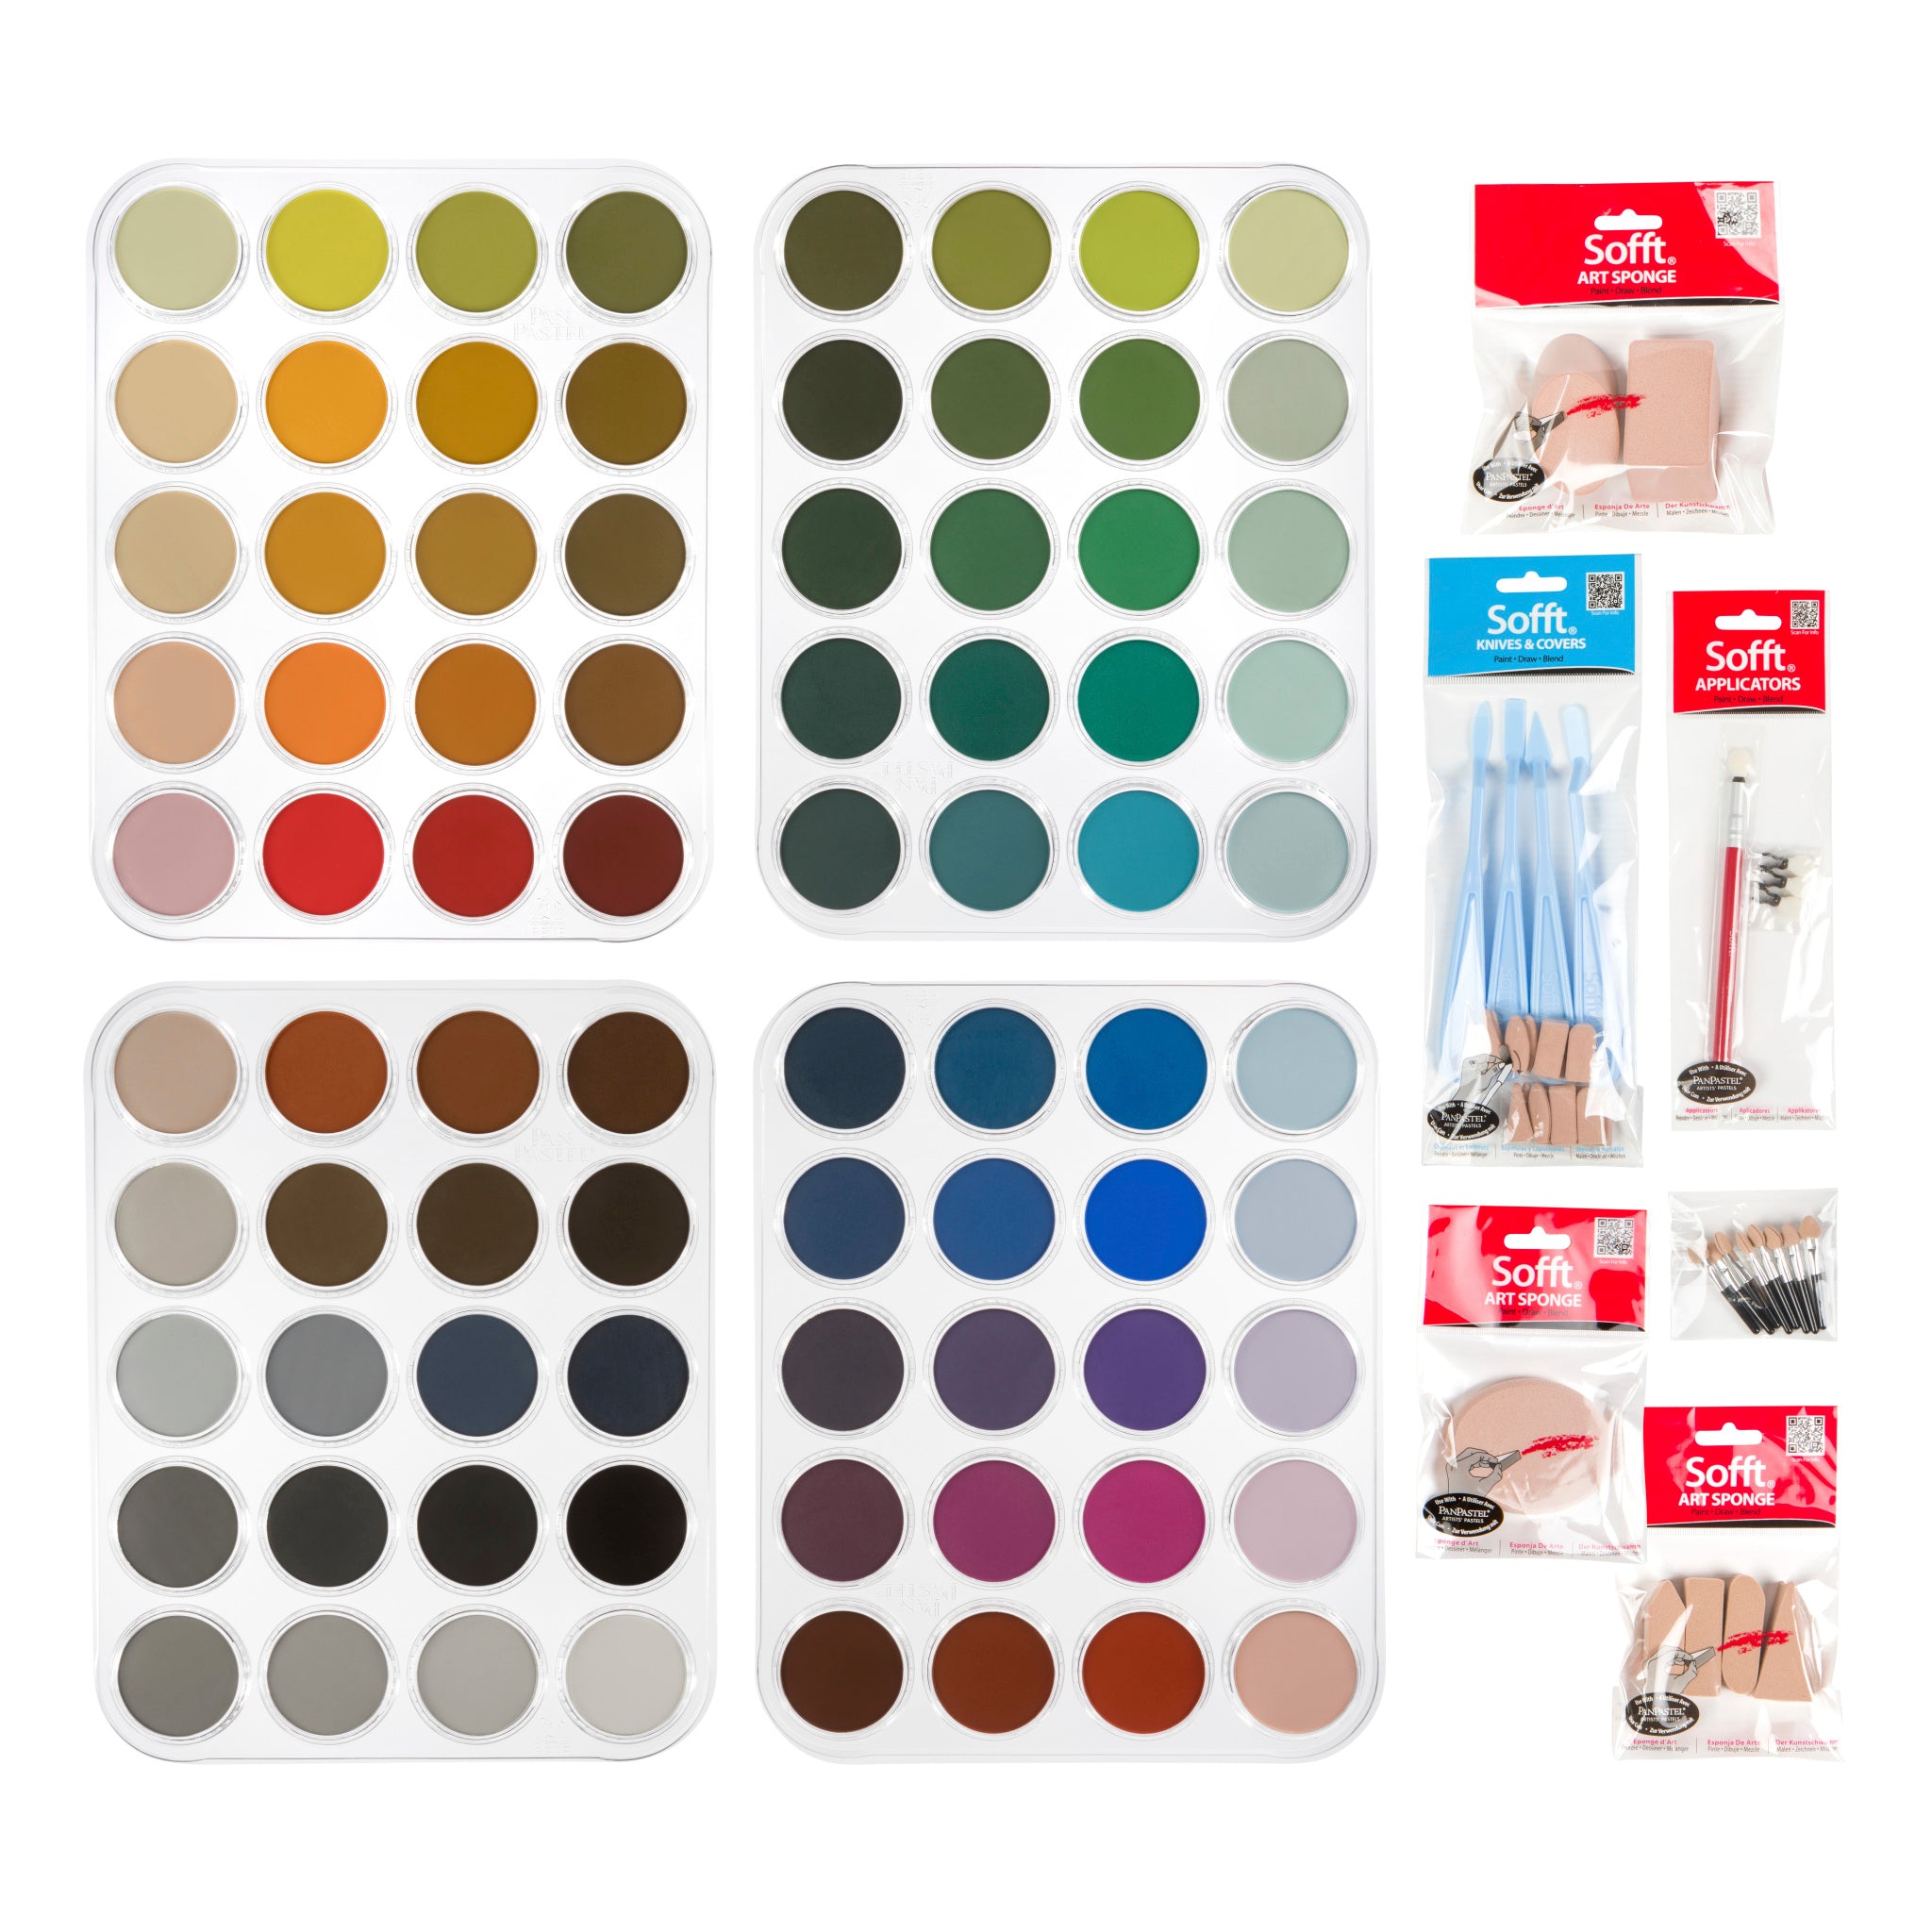 Panpastel 80 colour set plus free pastemat pad full set plus free sofft toolsStunning PanPastel full 80 pan colour set, all the colours you need for your creative pastel journey. PanPastels are a professional and versatile soft pastel, which can also be used on polymer clay.